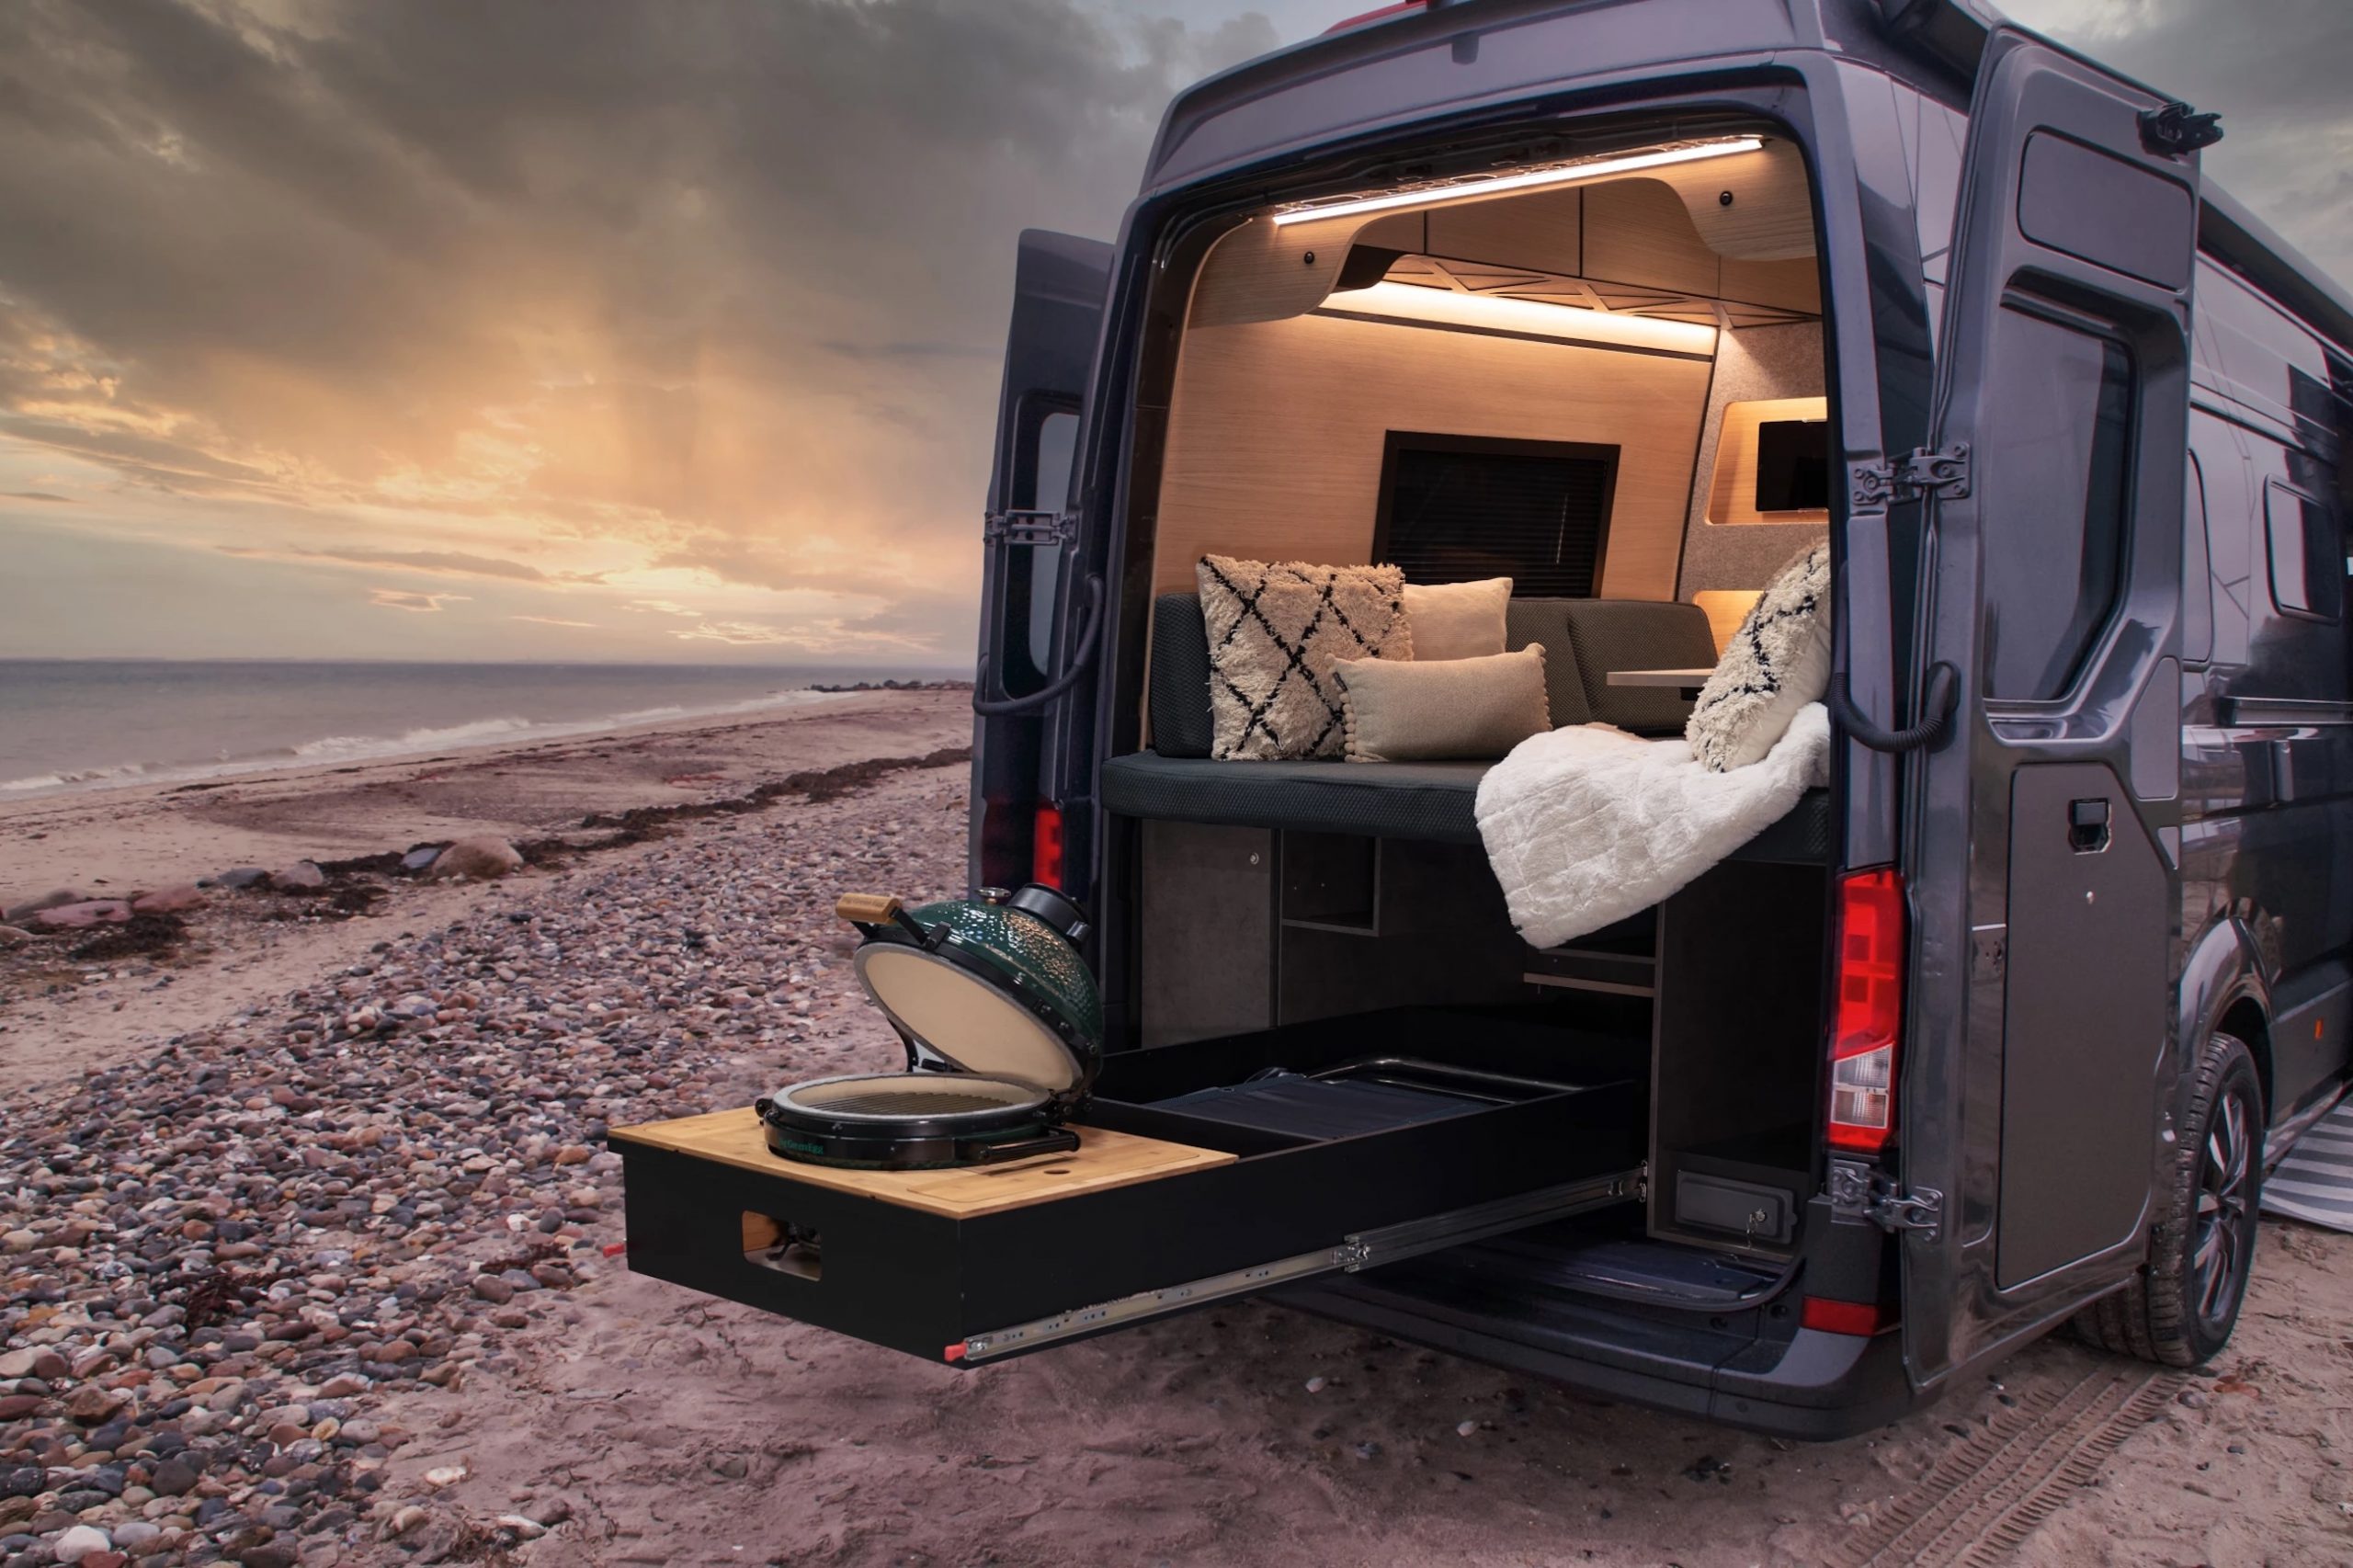 The Loef Camper van is one of the nicest campers in the world and its made for chefs